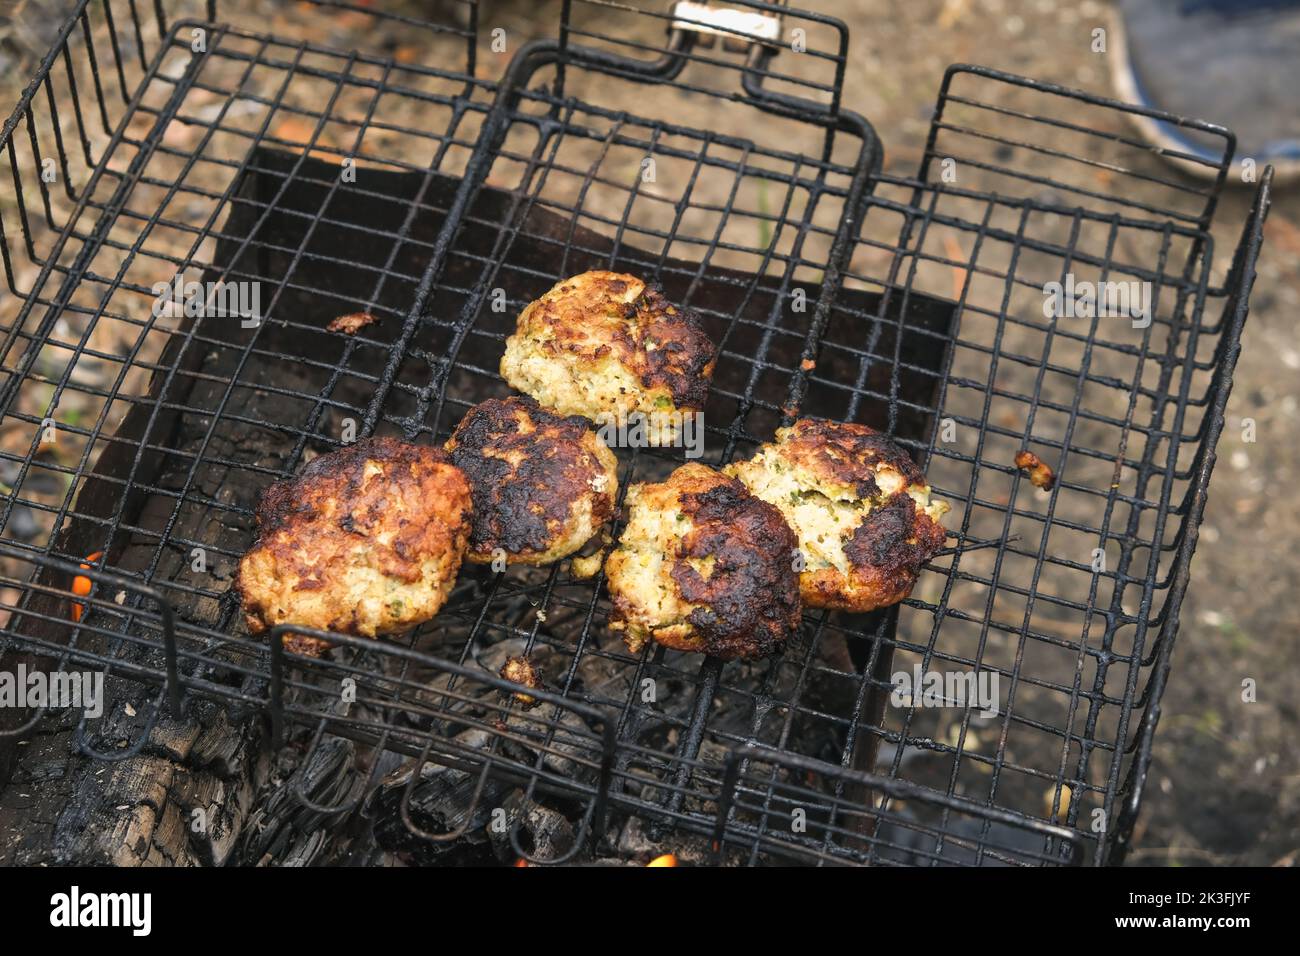 Cooking shish kebab on the grill. Cooking marinated meat on coals. Cooking meat on coals. Stock Photo